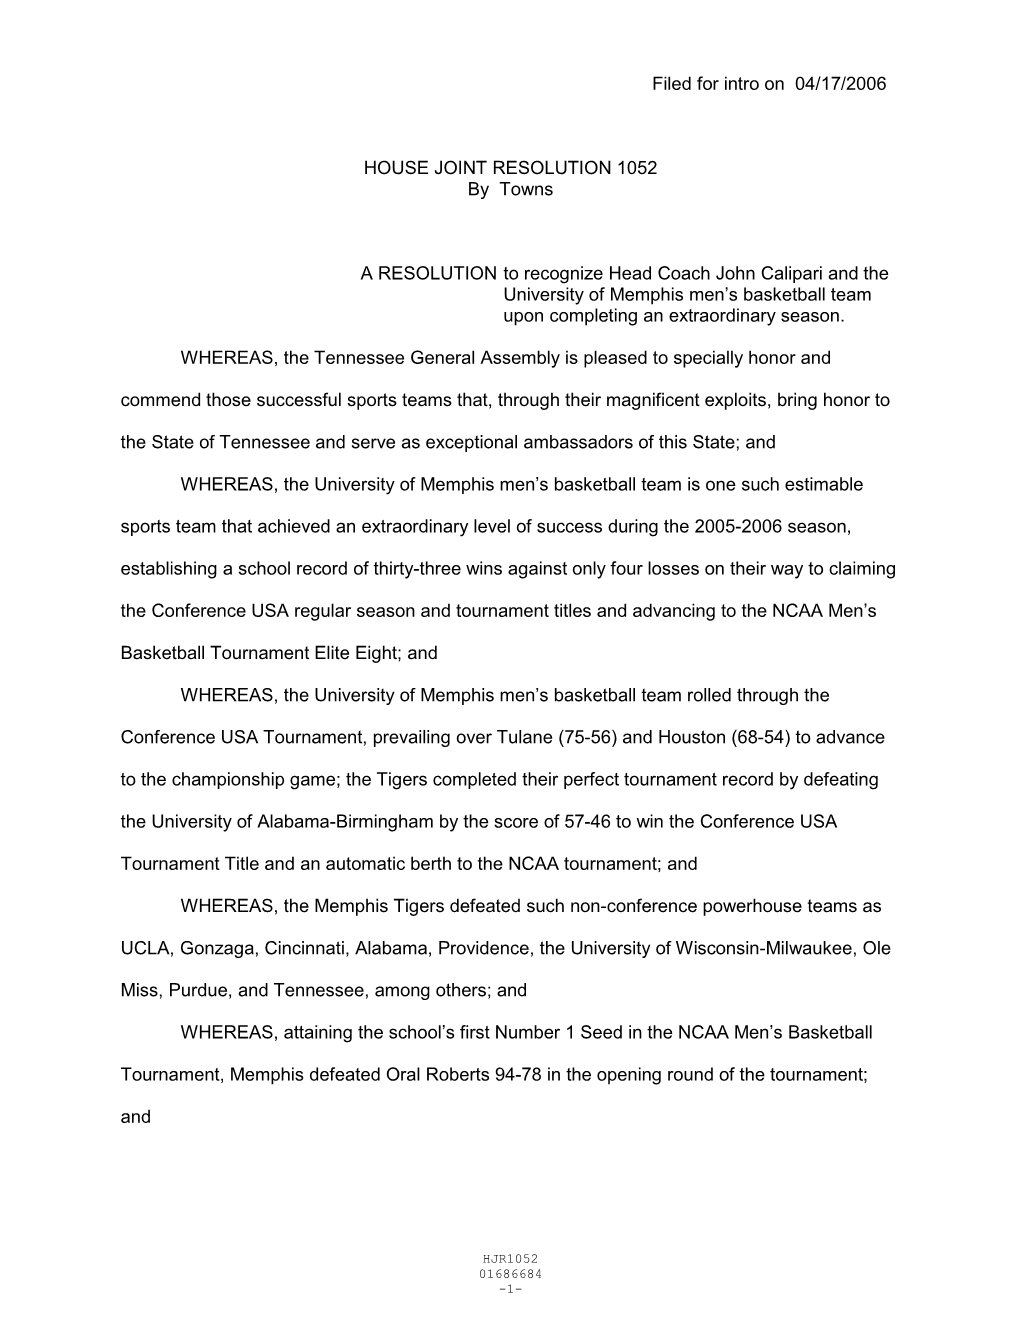 Filed for Intro on 04/17/2006 HOUSE JOINT RESOLUTION 1052 By